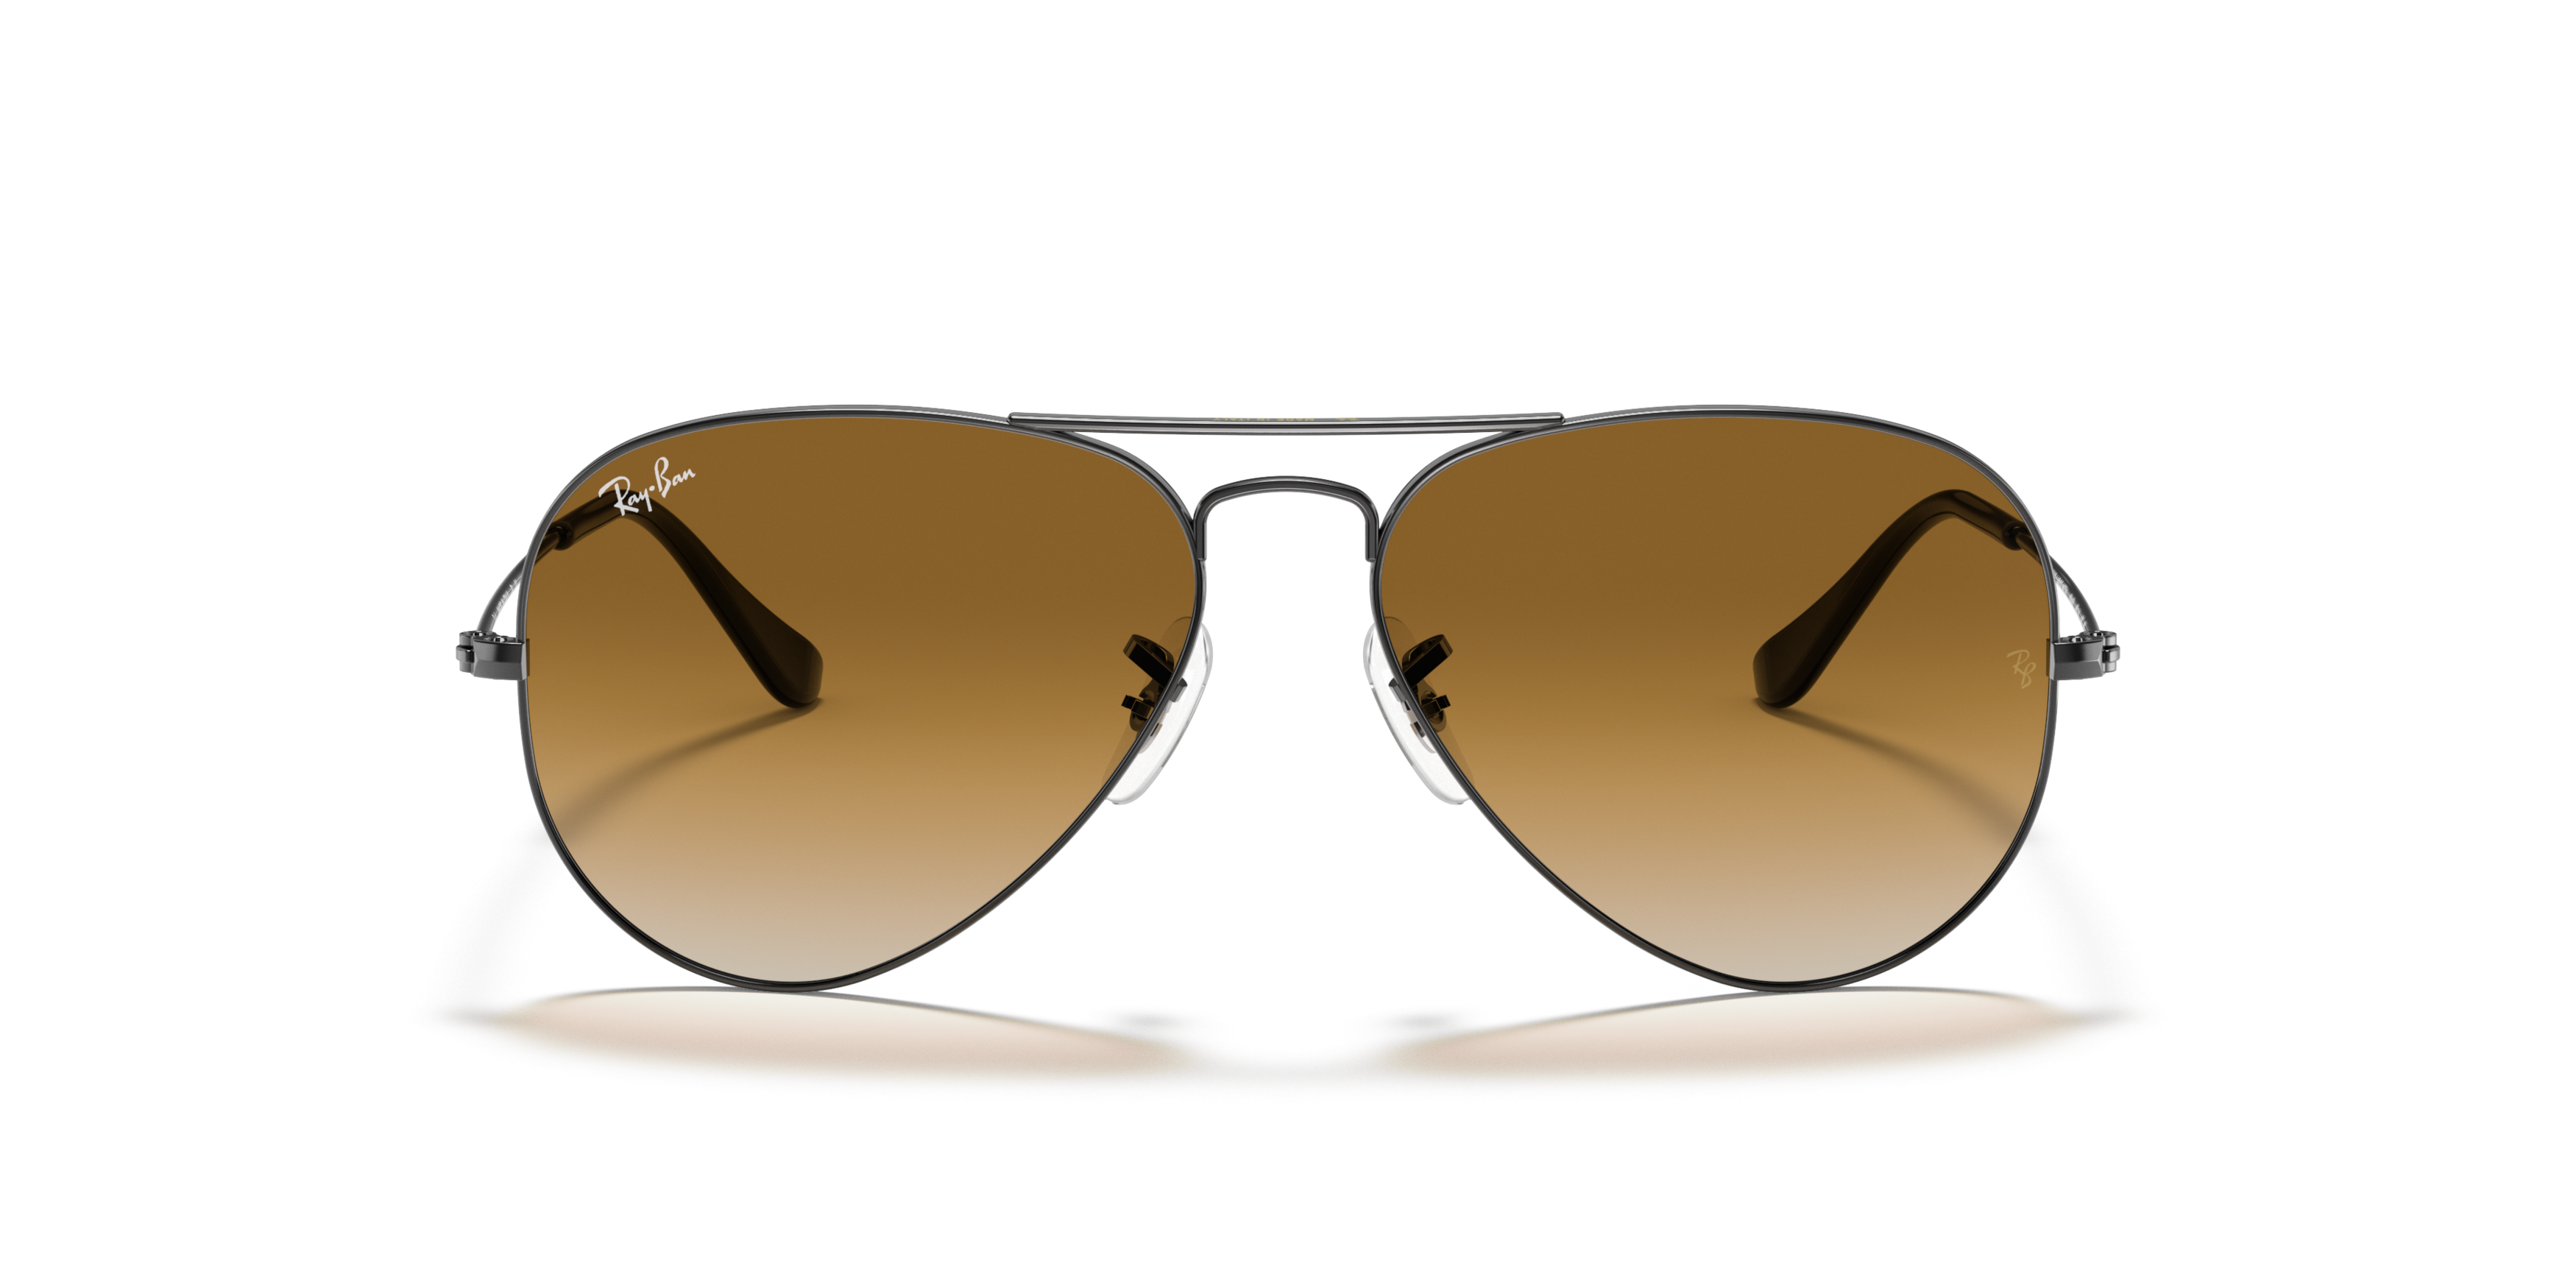 [products.image.front] Ray-Ban AVIATOR 004/51